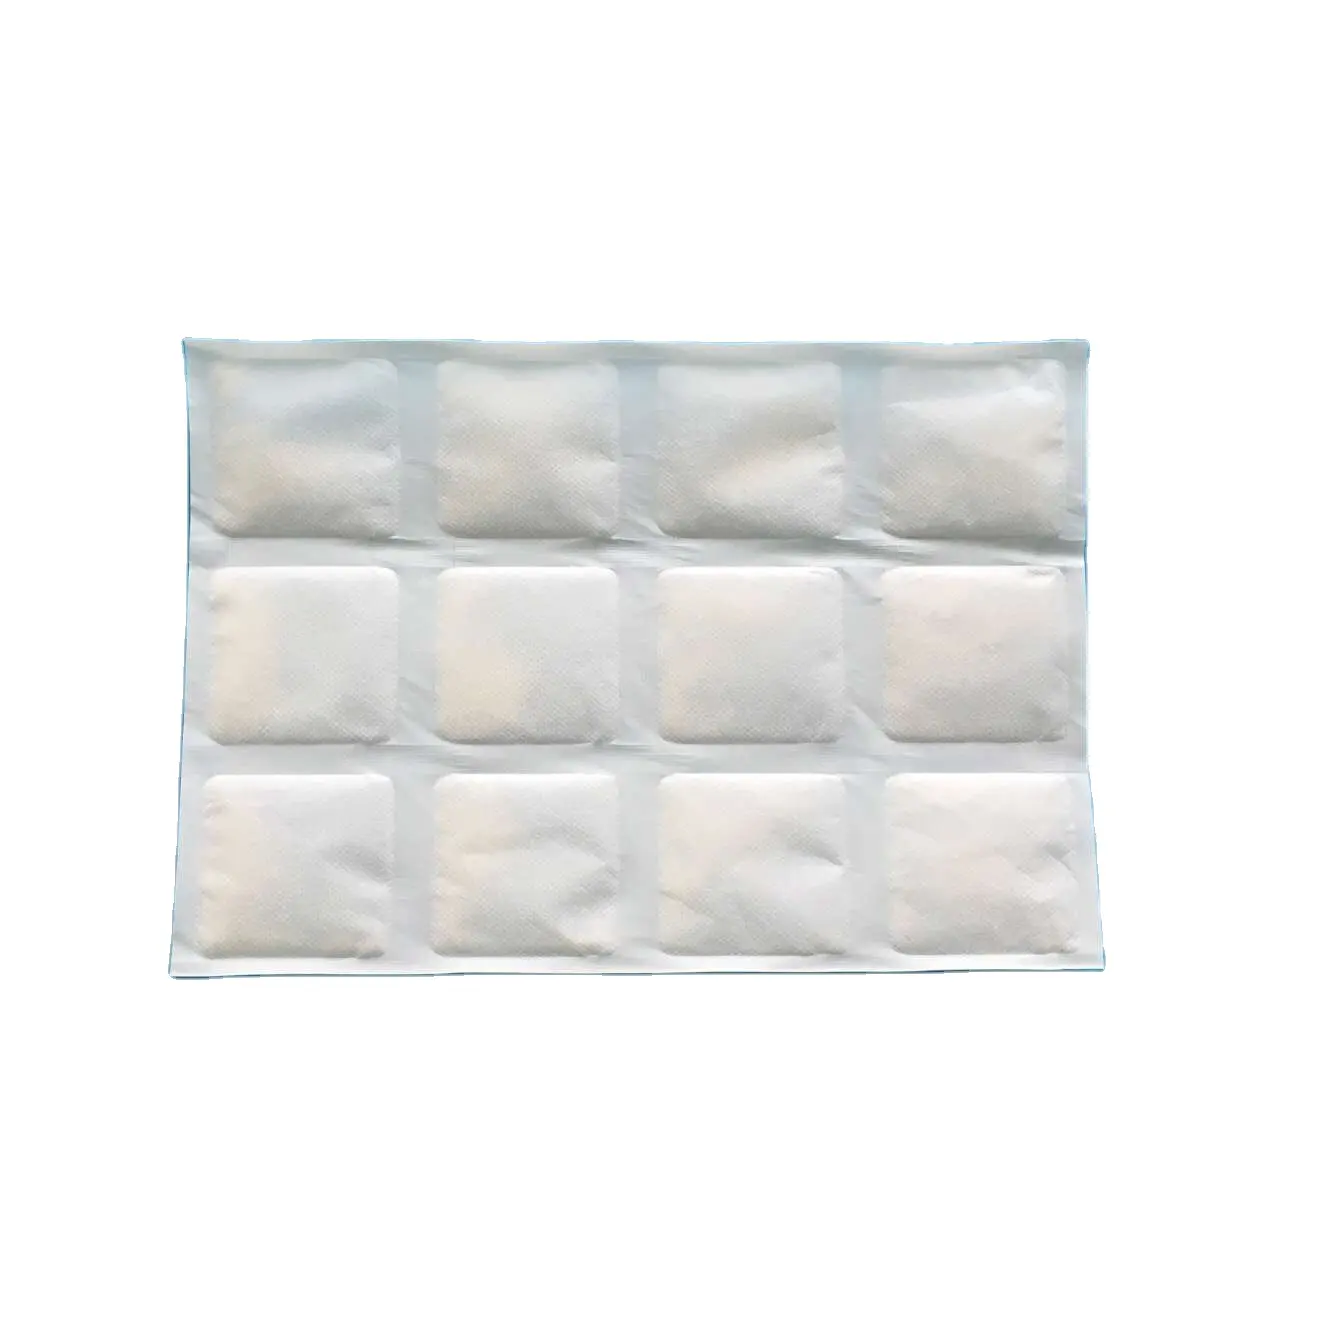 Disposable Cold Therapy Ice Packs Techni Ice Heavy Duty Reusable Dry Ice Packs Flexible For Bottle Cooling Sheet